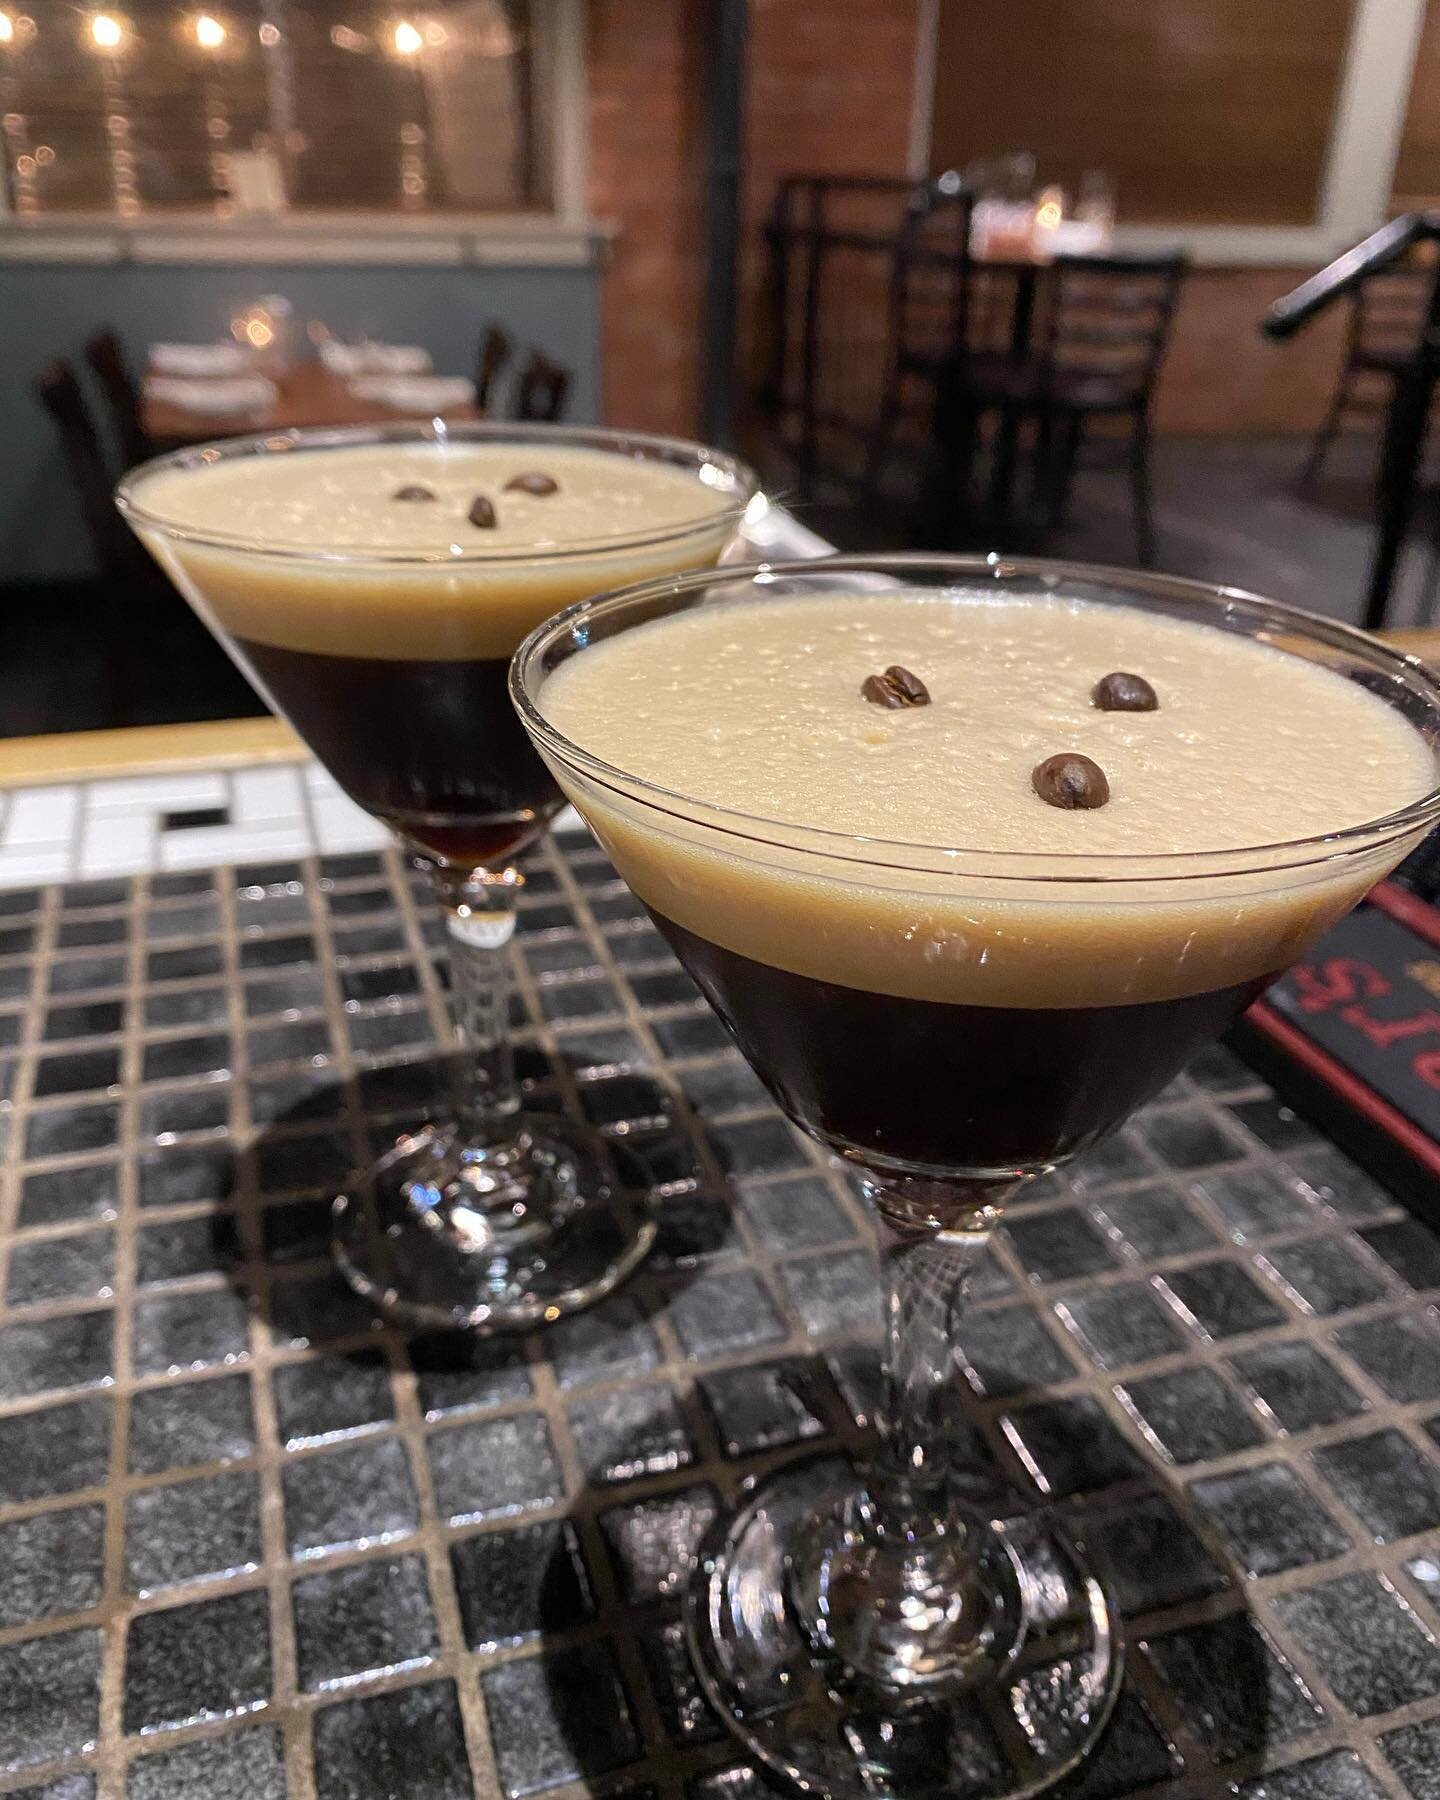 Start the weekend off right. 

FLX coffee roasters espresso, Mr Black, Vodka, simple, and @feebrothersbitters chocolate bitters.